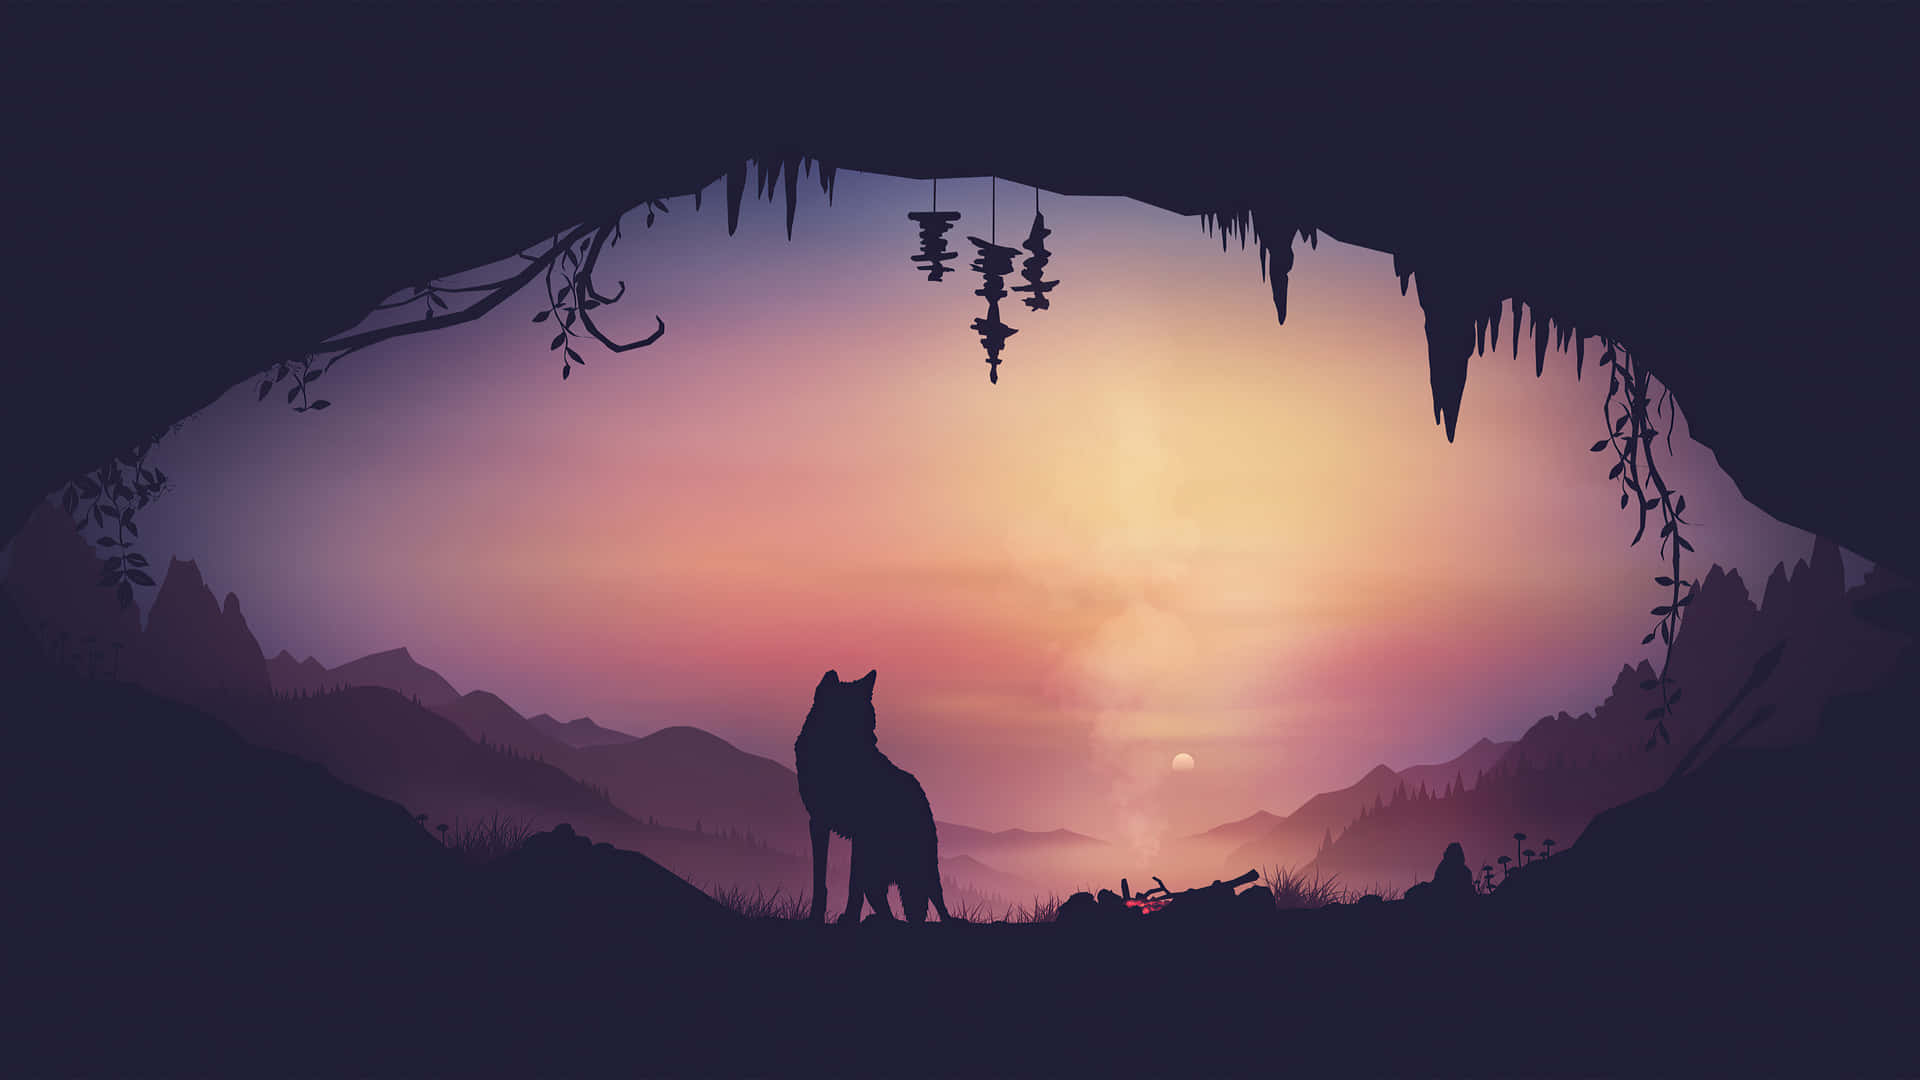 Wolf Aesthetic Inside Cave Wallpaper